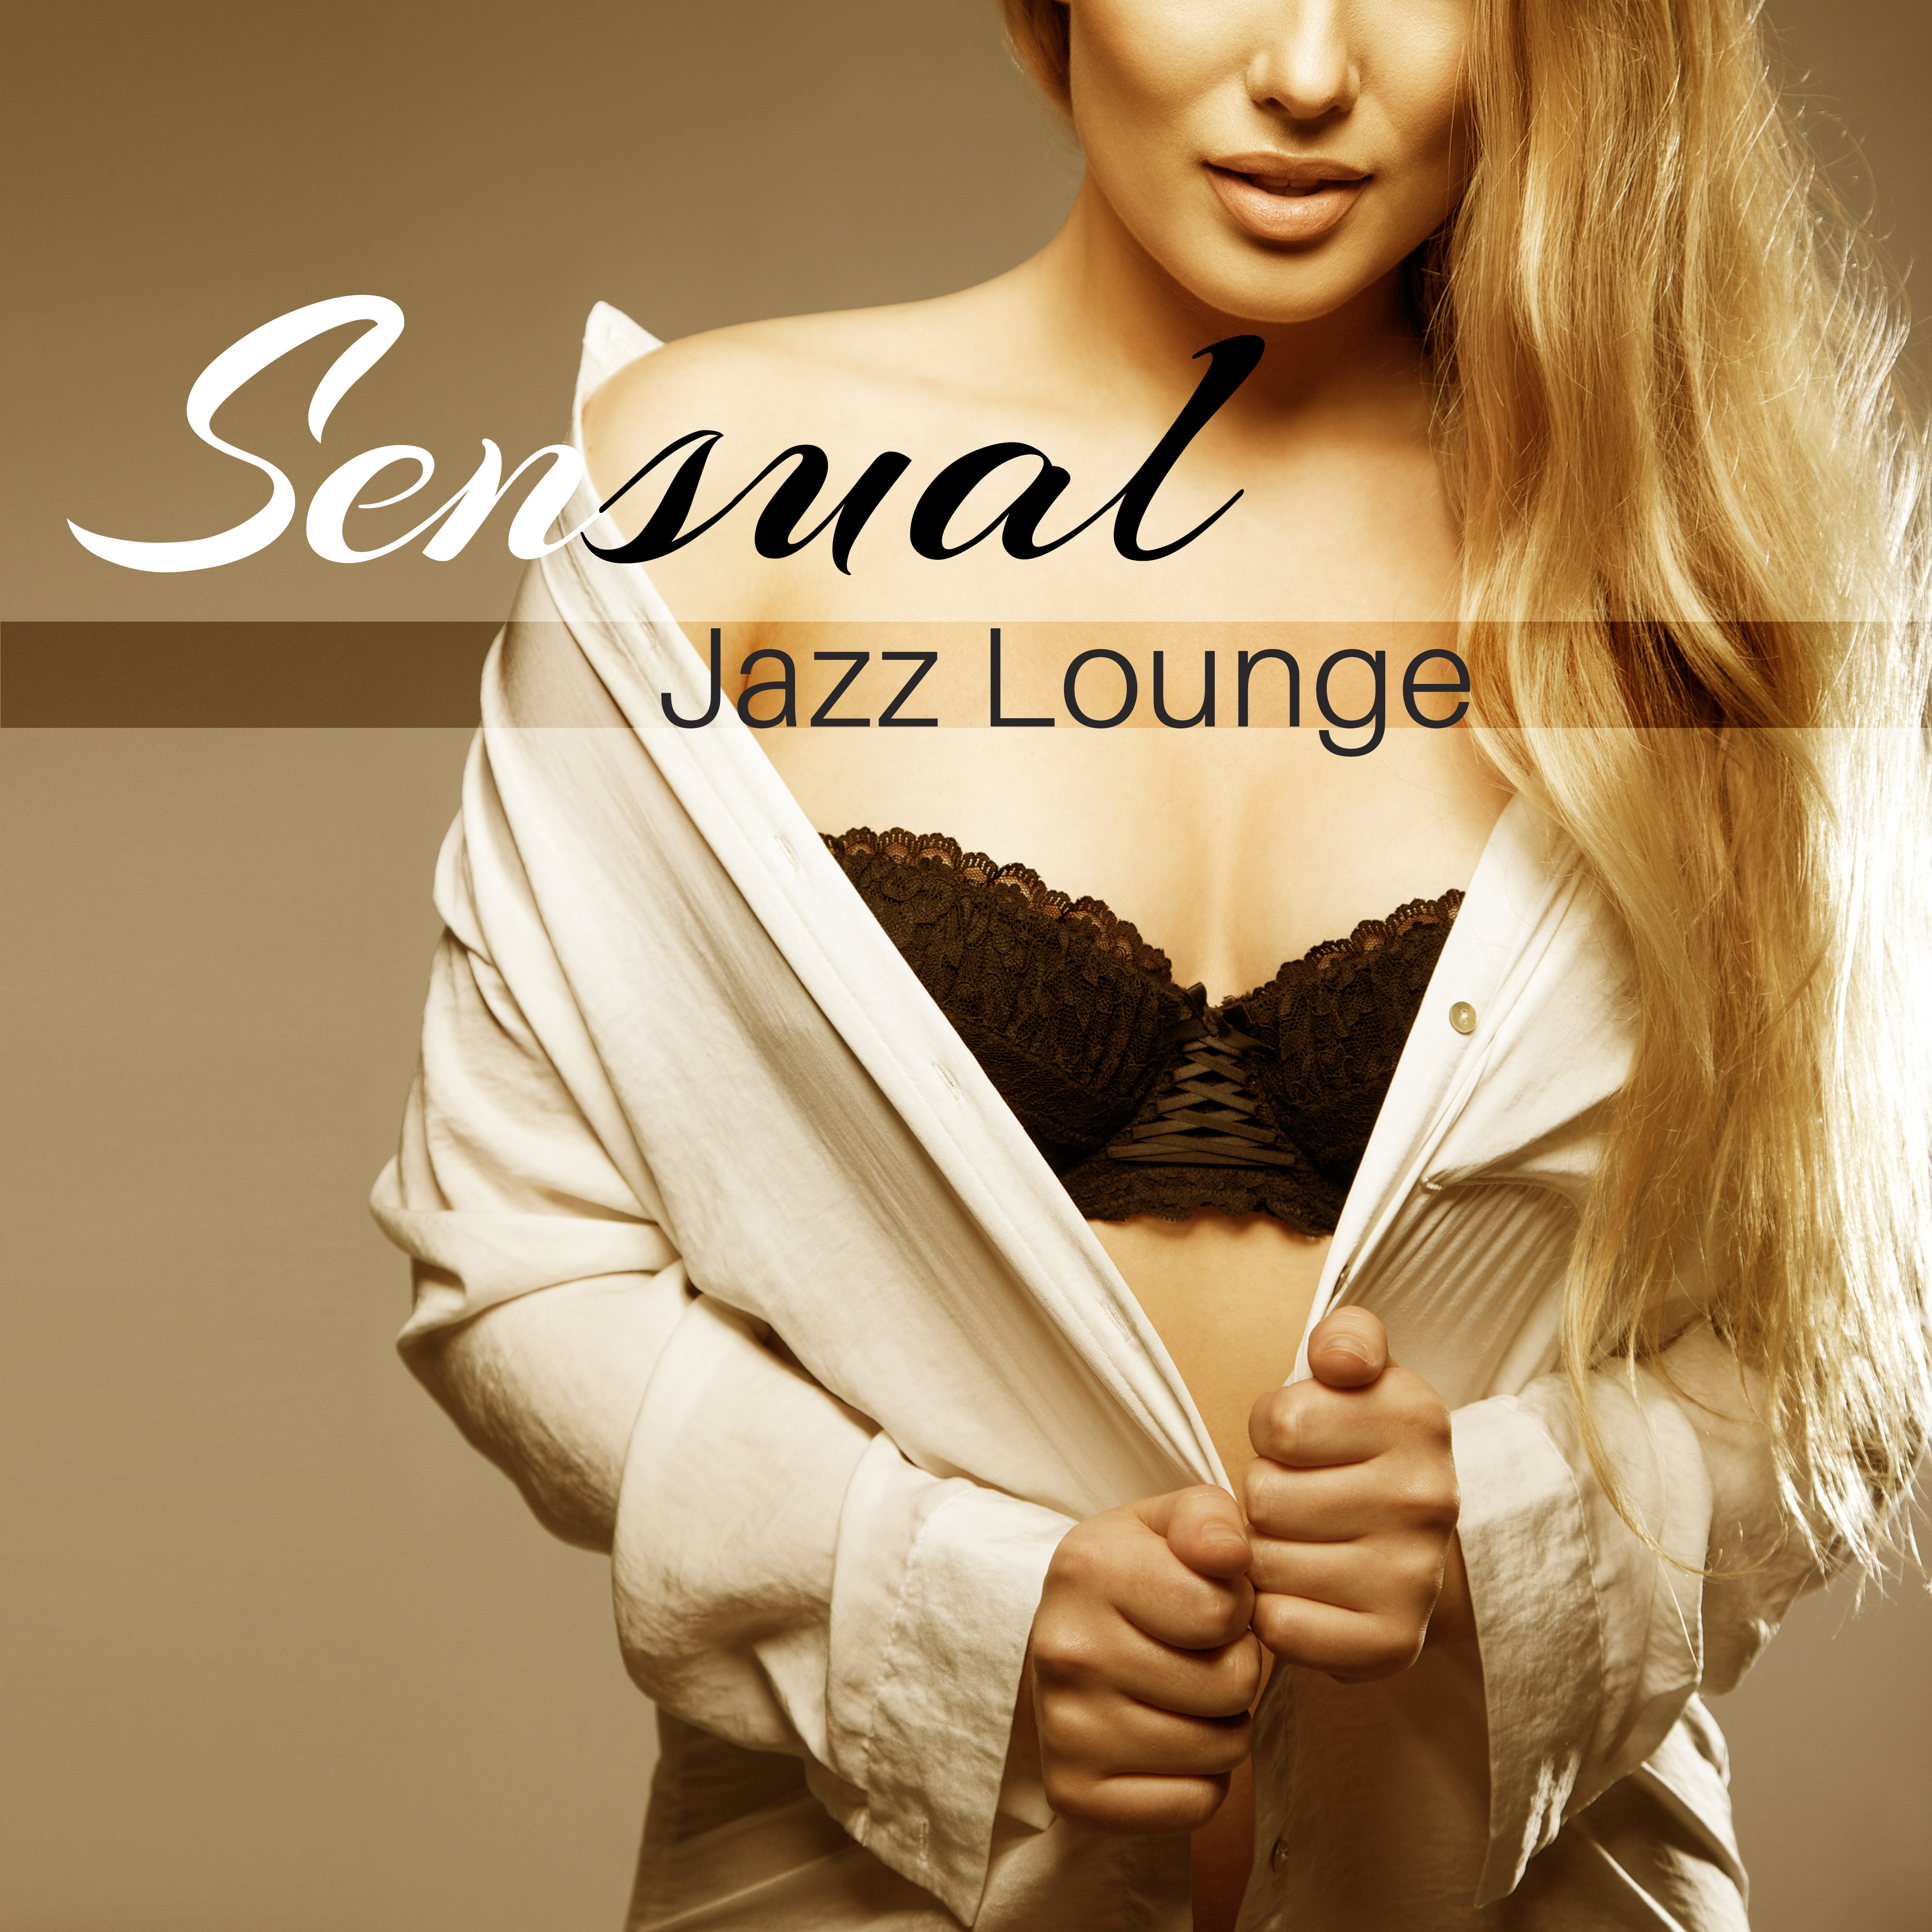 Sensual Jazz Lounge  Romantic Jazz Music, Shades of Piano Jazz, Smooth Sounds for Lovers